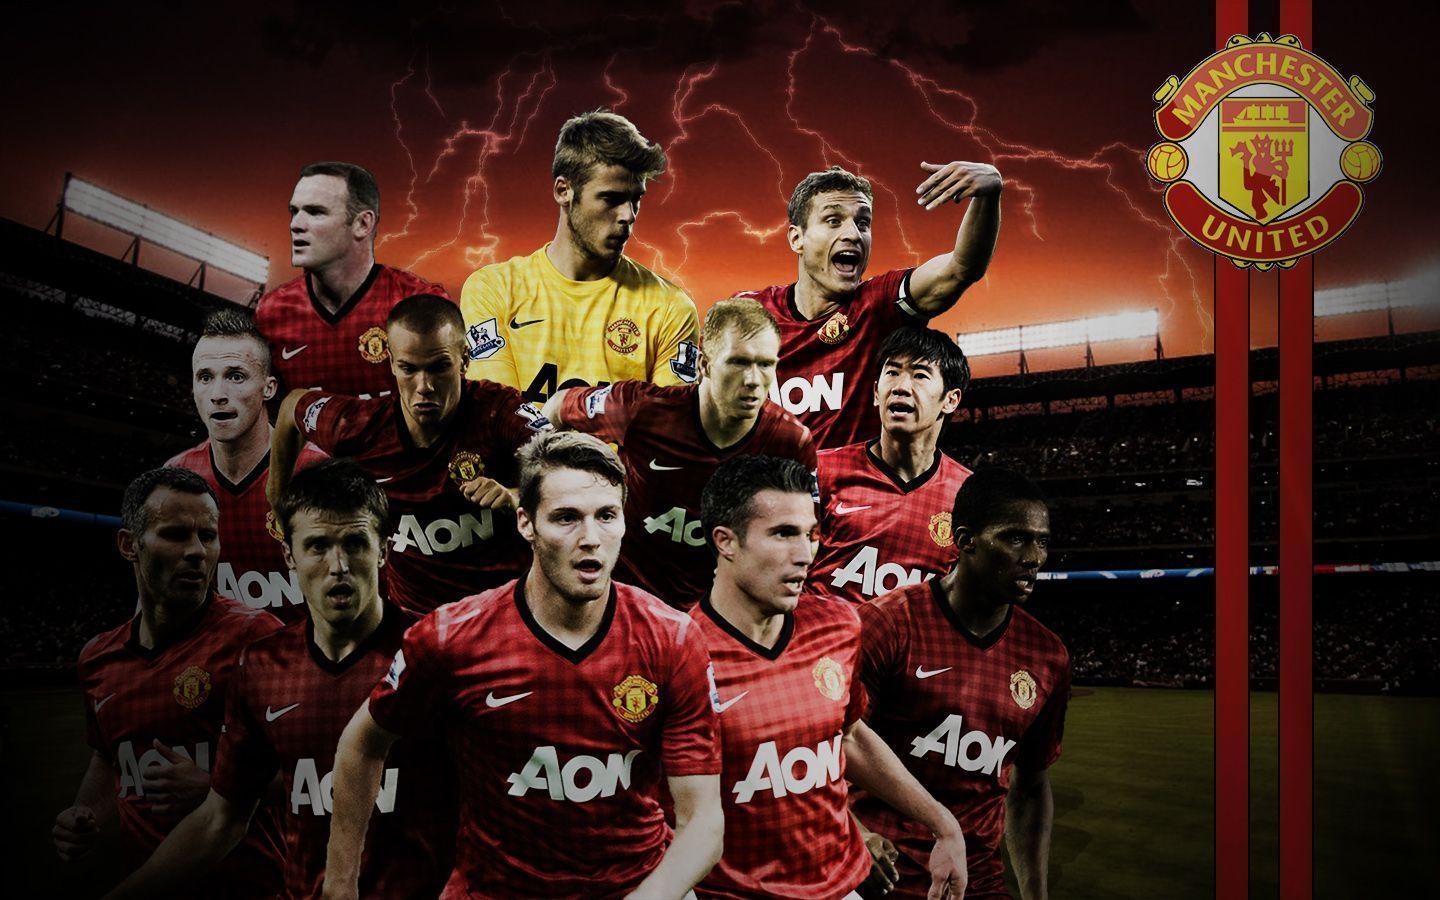 Manchester United HD Wallpapers 2017 - Wallpaper Cave